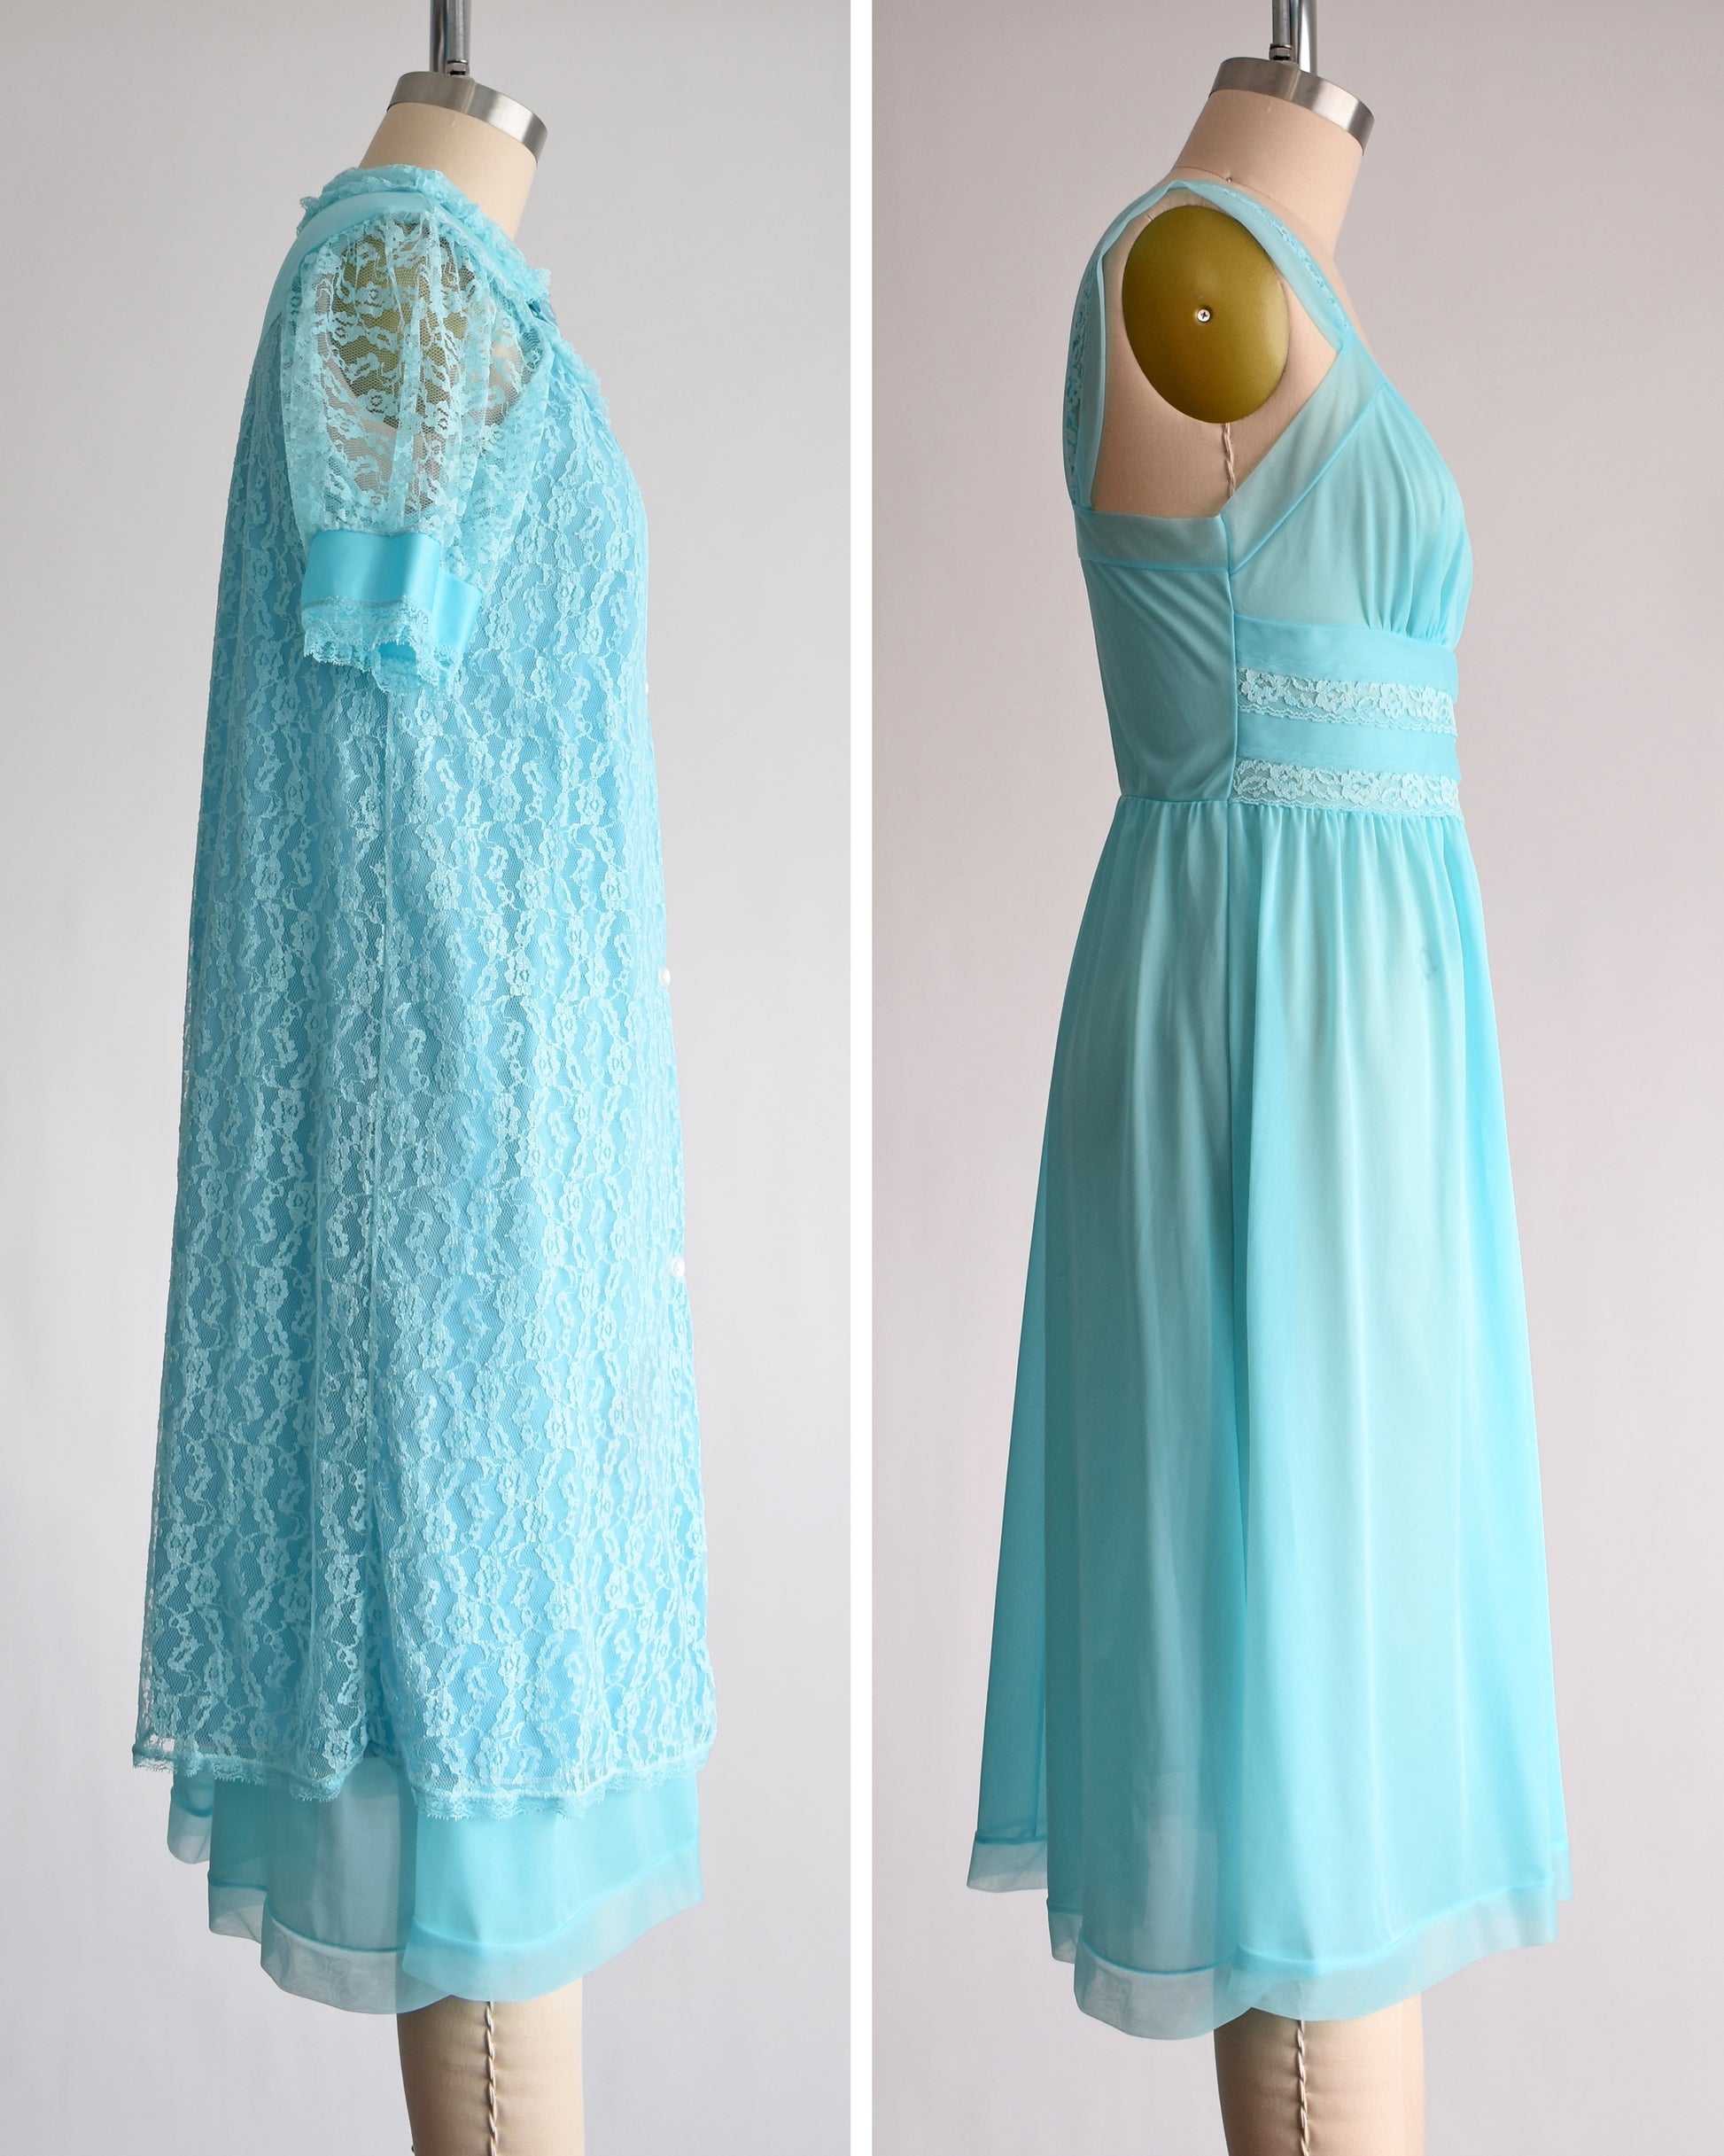 Side by side views of a A vintage 1960s aqua blue peignoir set that comes with a lace robe and matching nightgown. The left shows the robe and the right only shows the nightgown